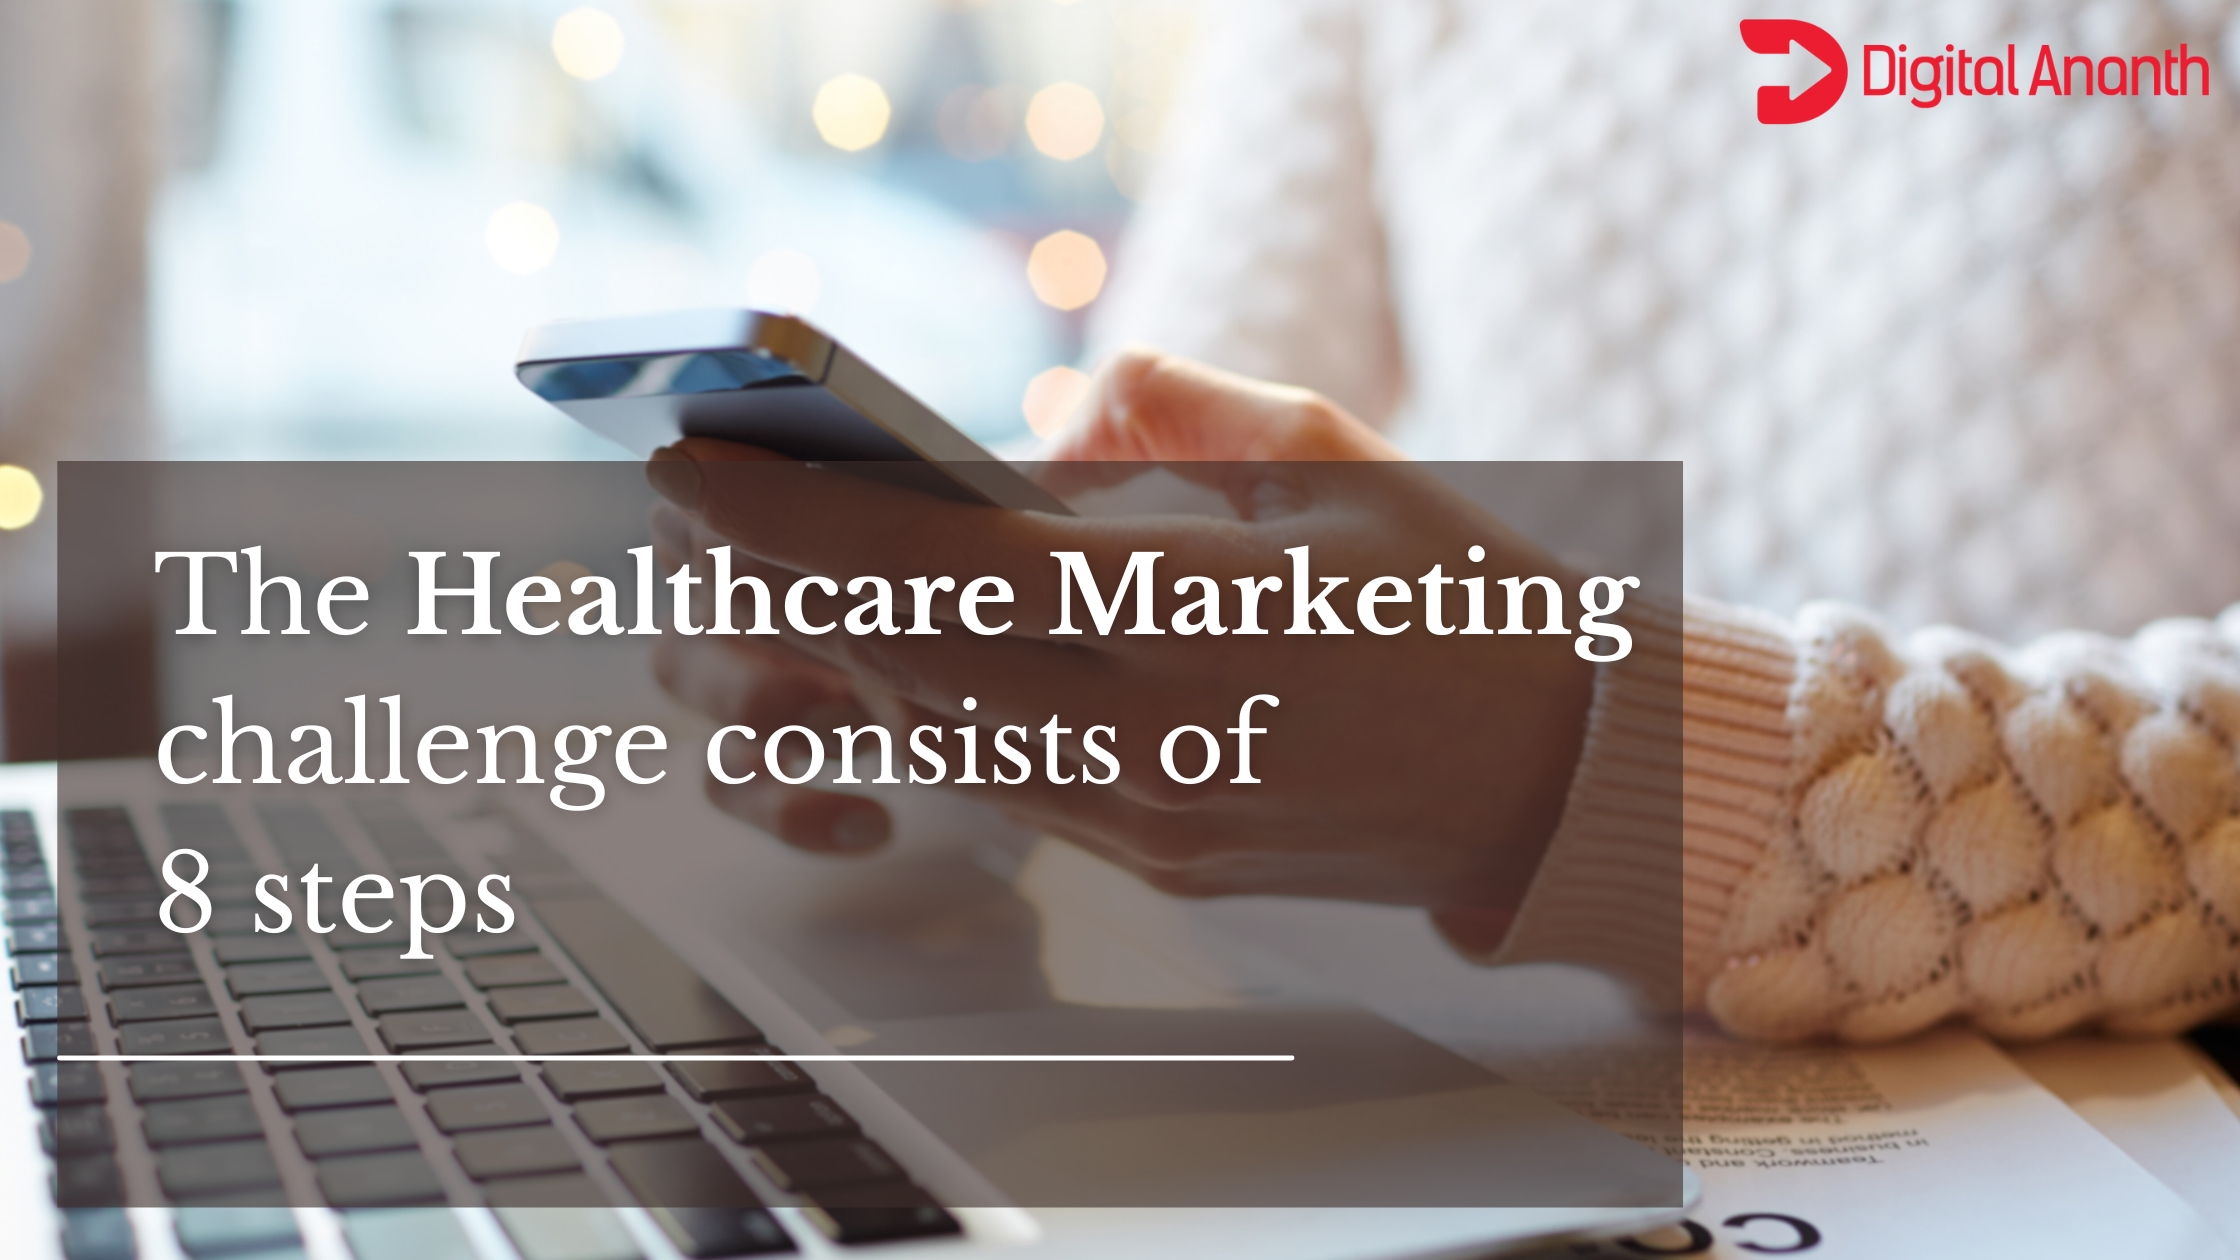 The healthcare marketing challenge consists of 8 steps